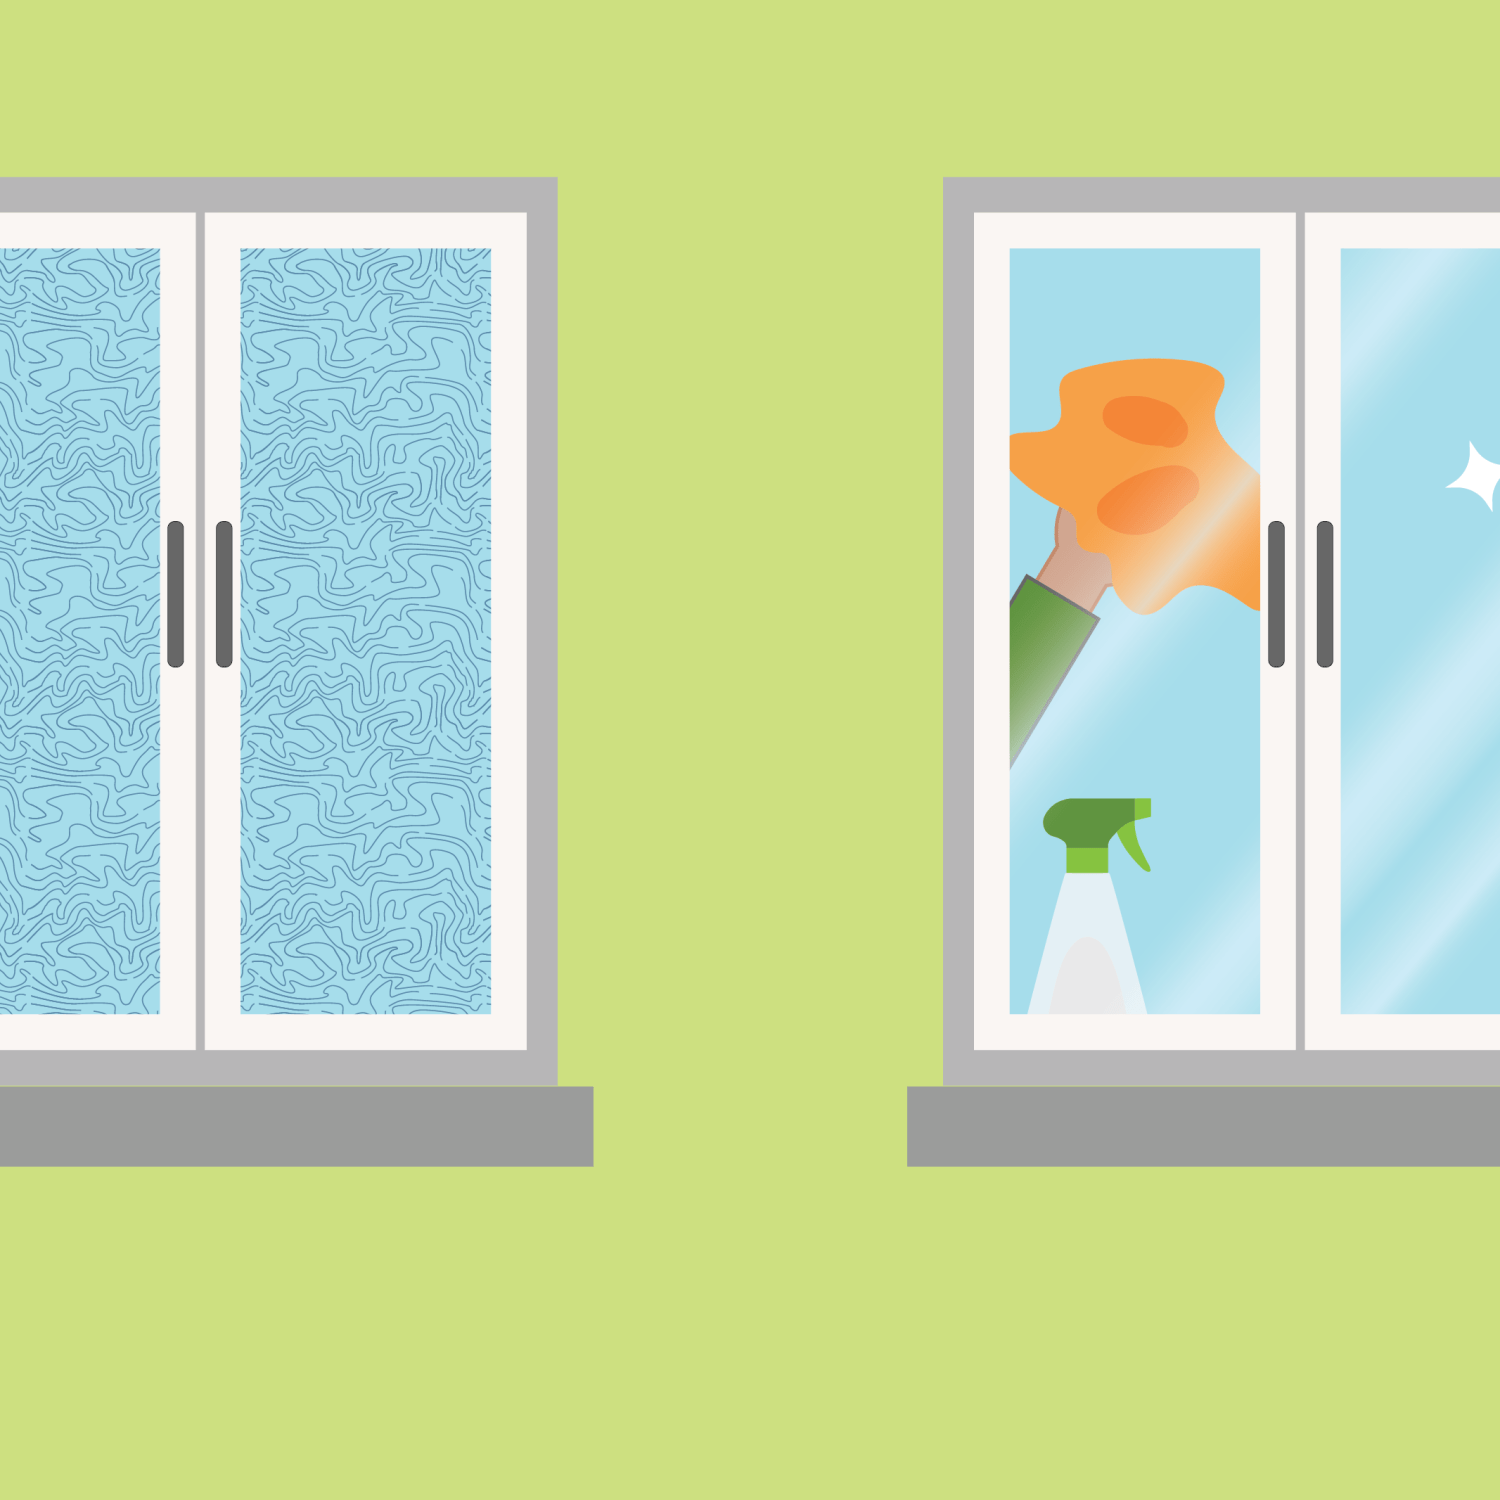 Graphic of one dirty window and then one window that was cleaned like you could do with a homemade cleaning solution